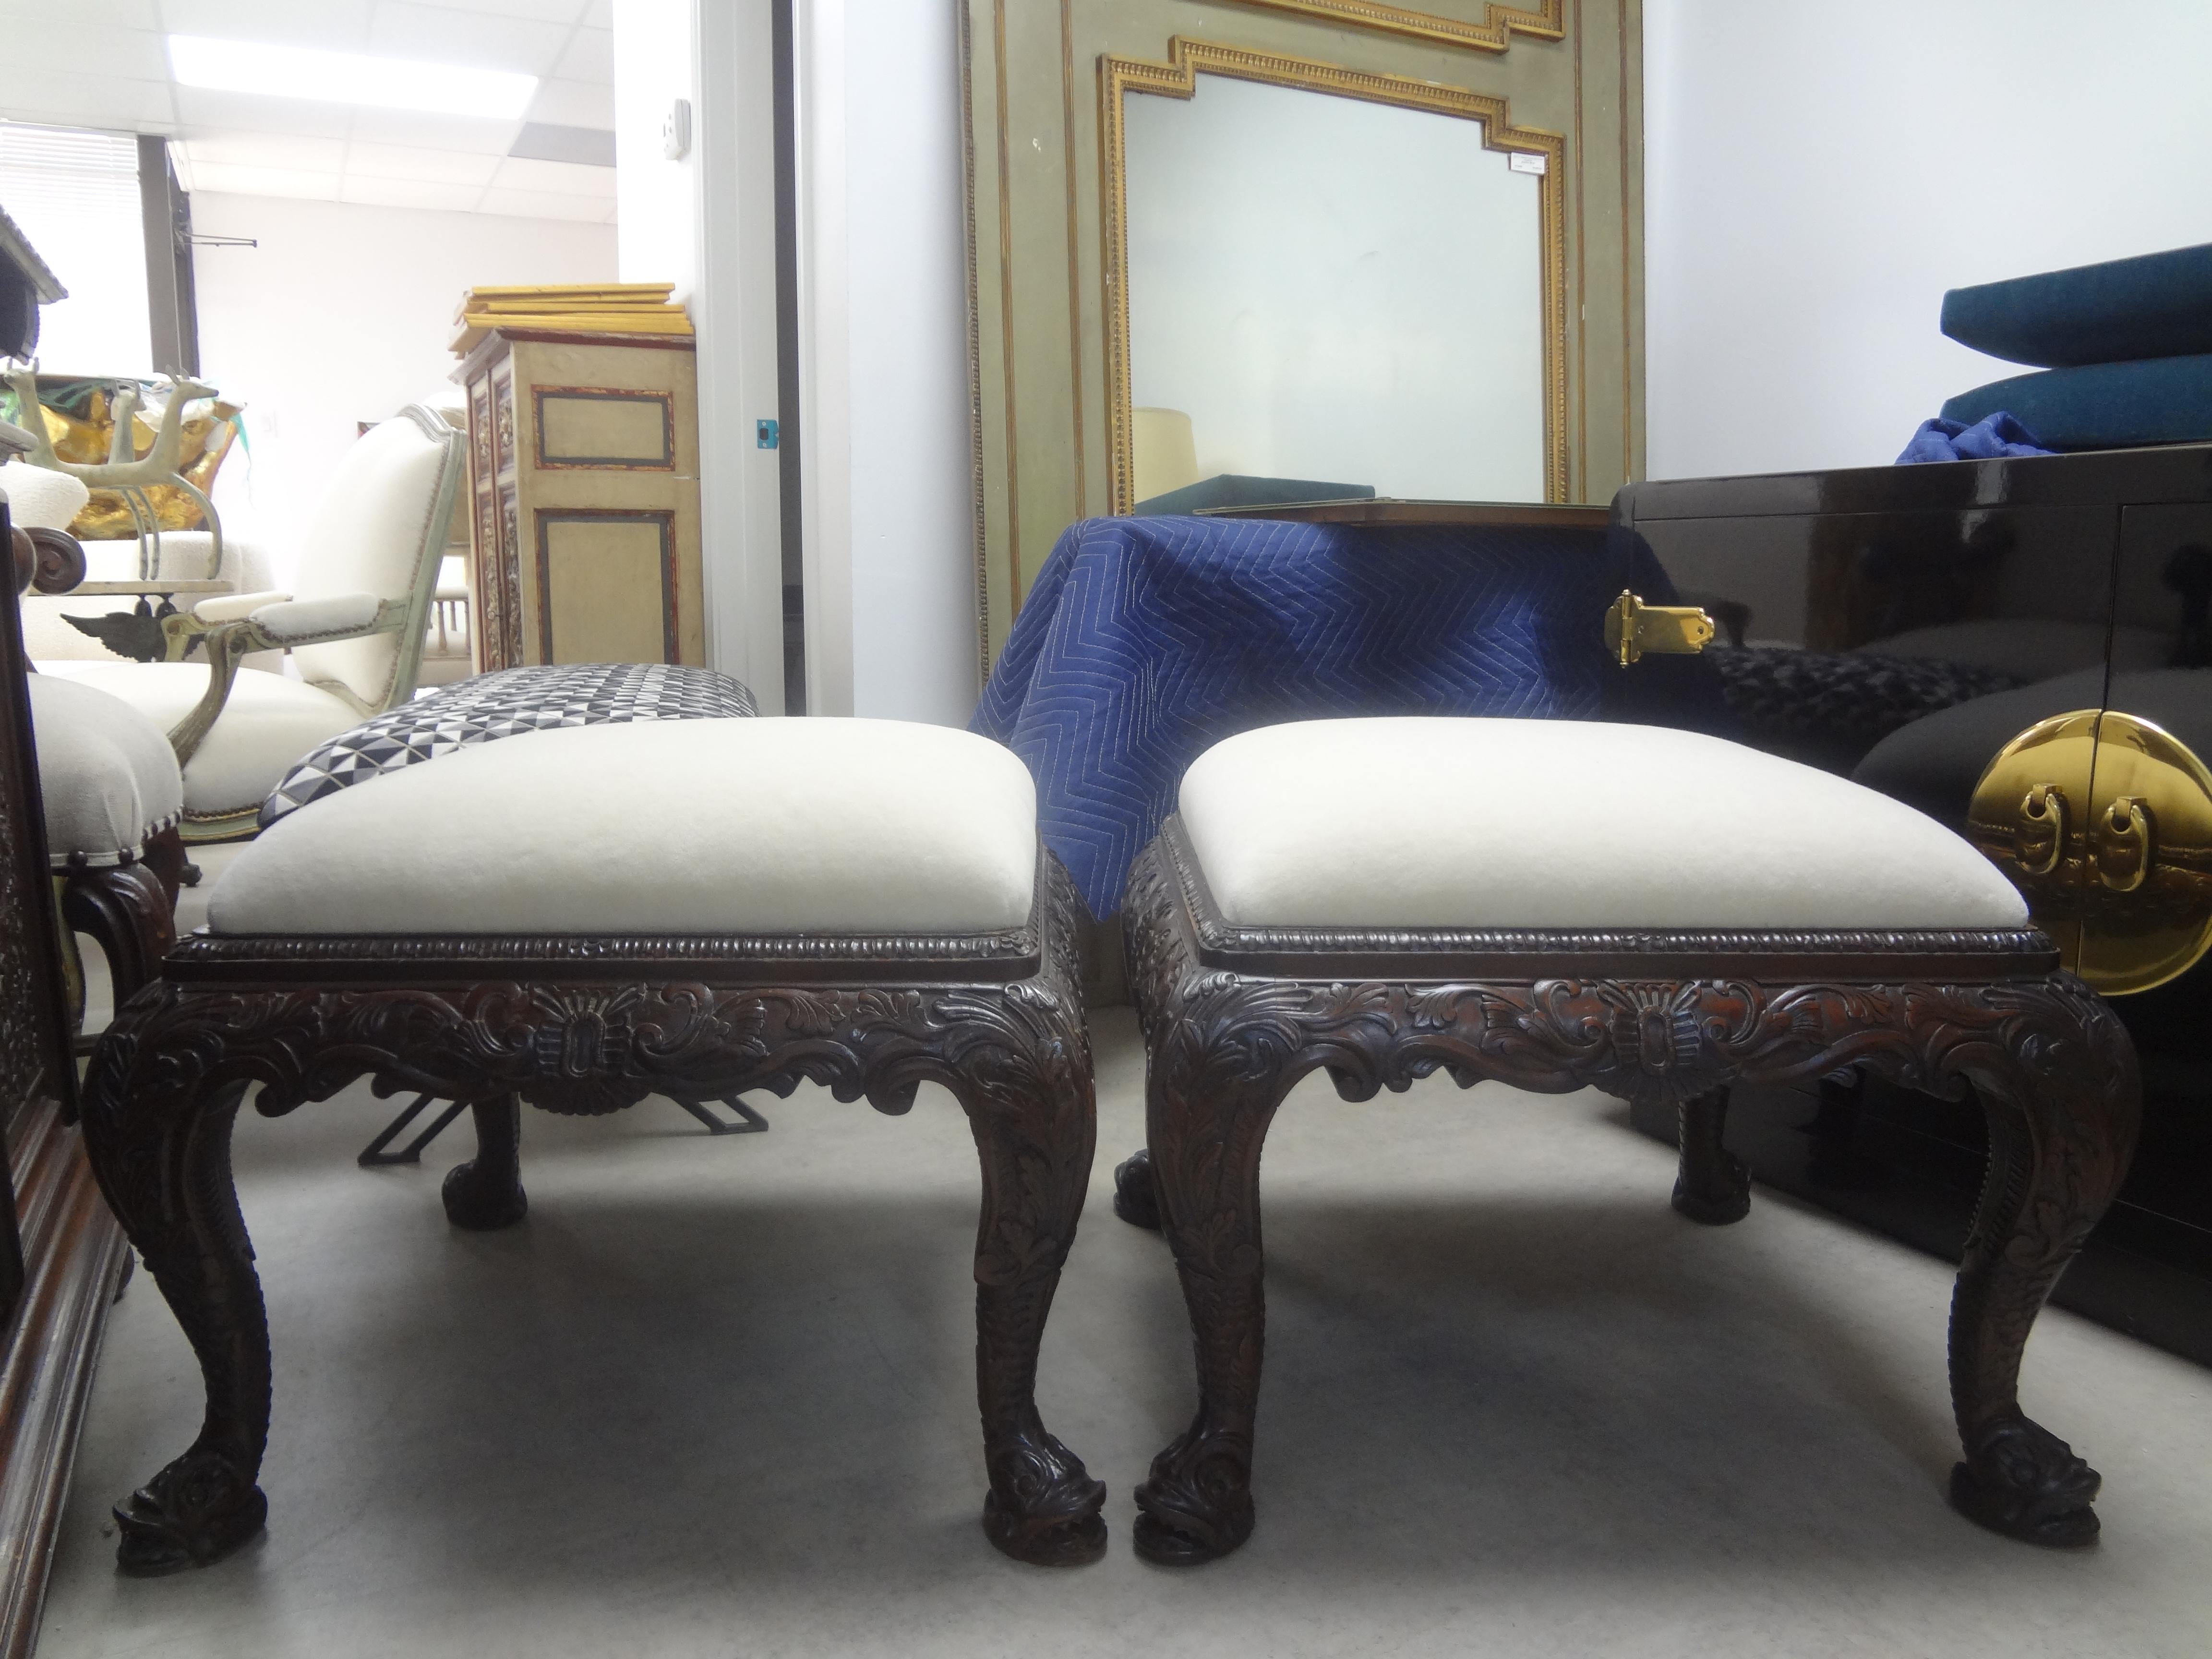 Pair of large scale antique English Regency style ottomans with dolphin feet. These stunning large Regency style benches or ottomans are beautifully carved on all sides and large enough for extra seating where needed. This pair has been newly